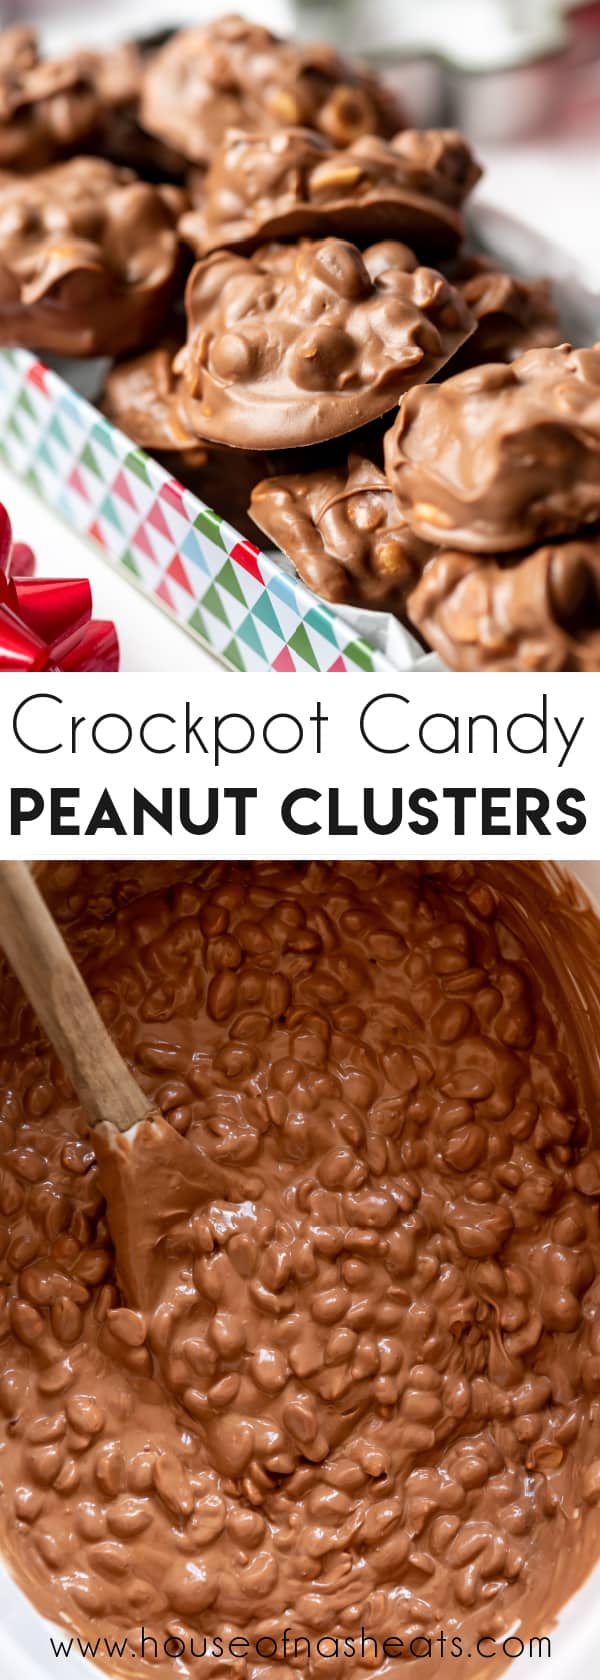 A collage of crockpot candy images with text overlay.